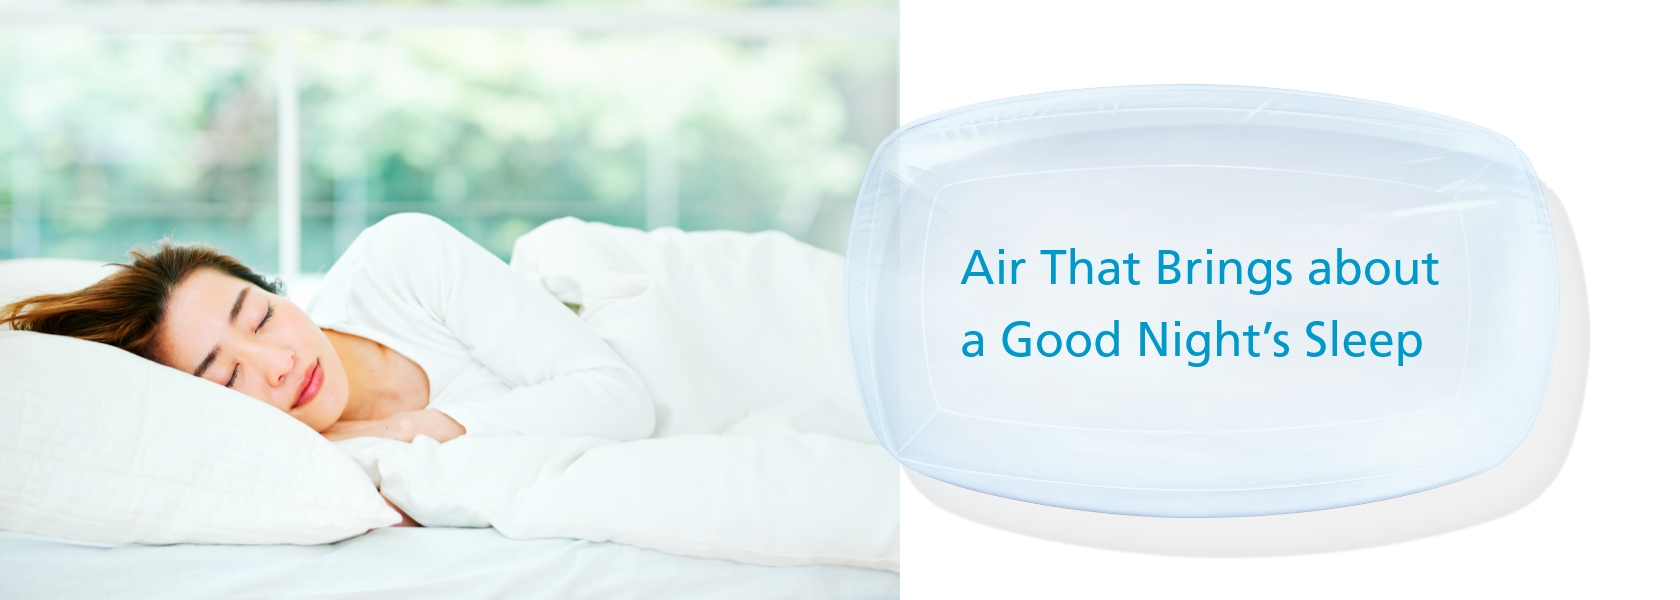 Air That Brings about a Good Night’s Sleep